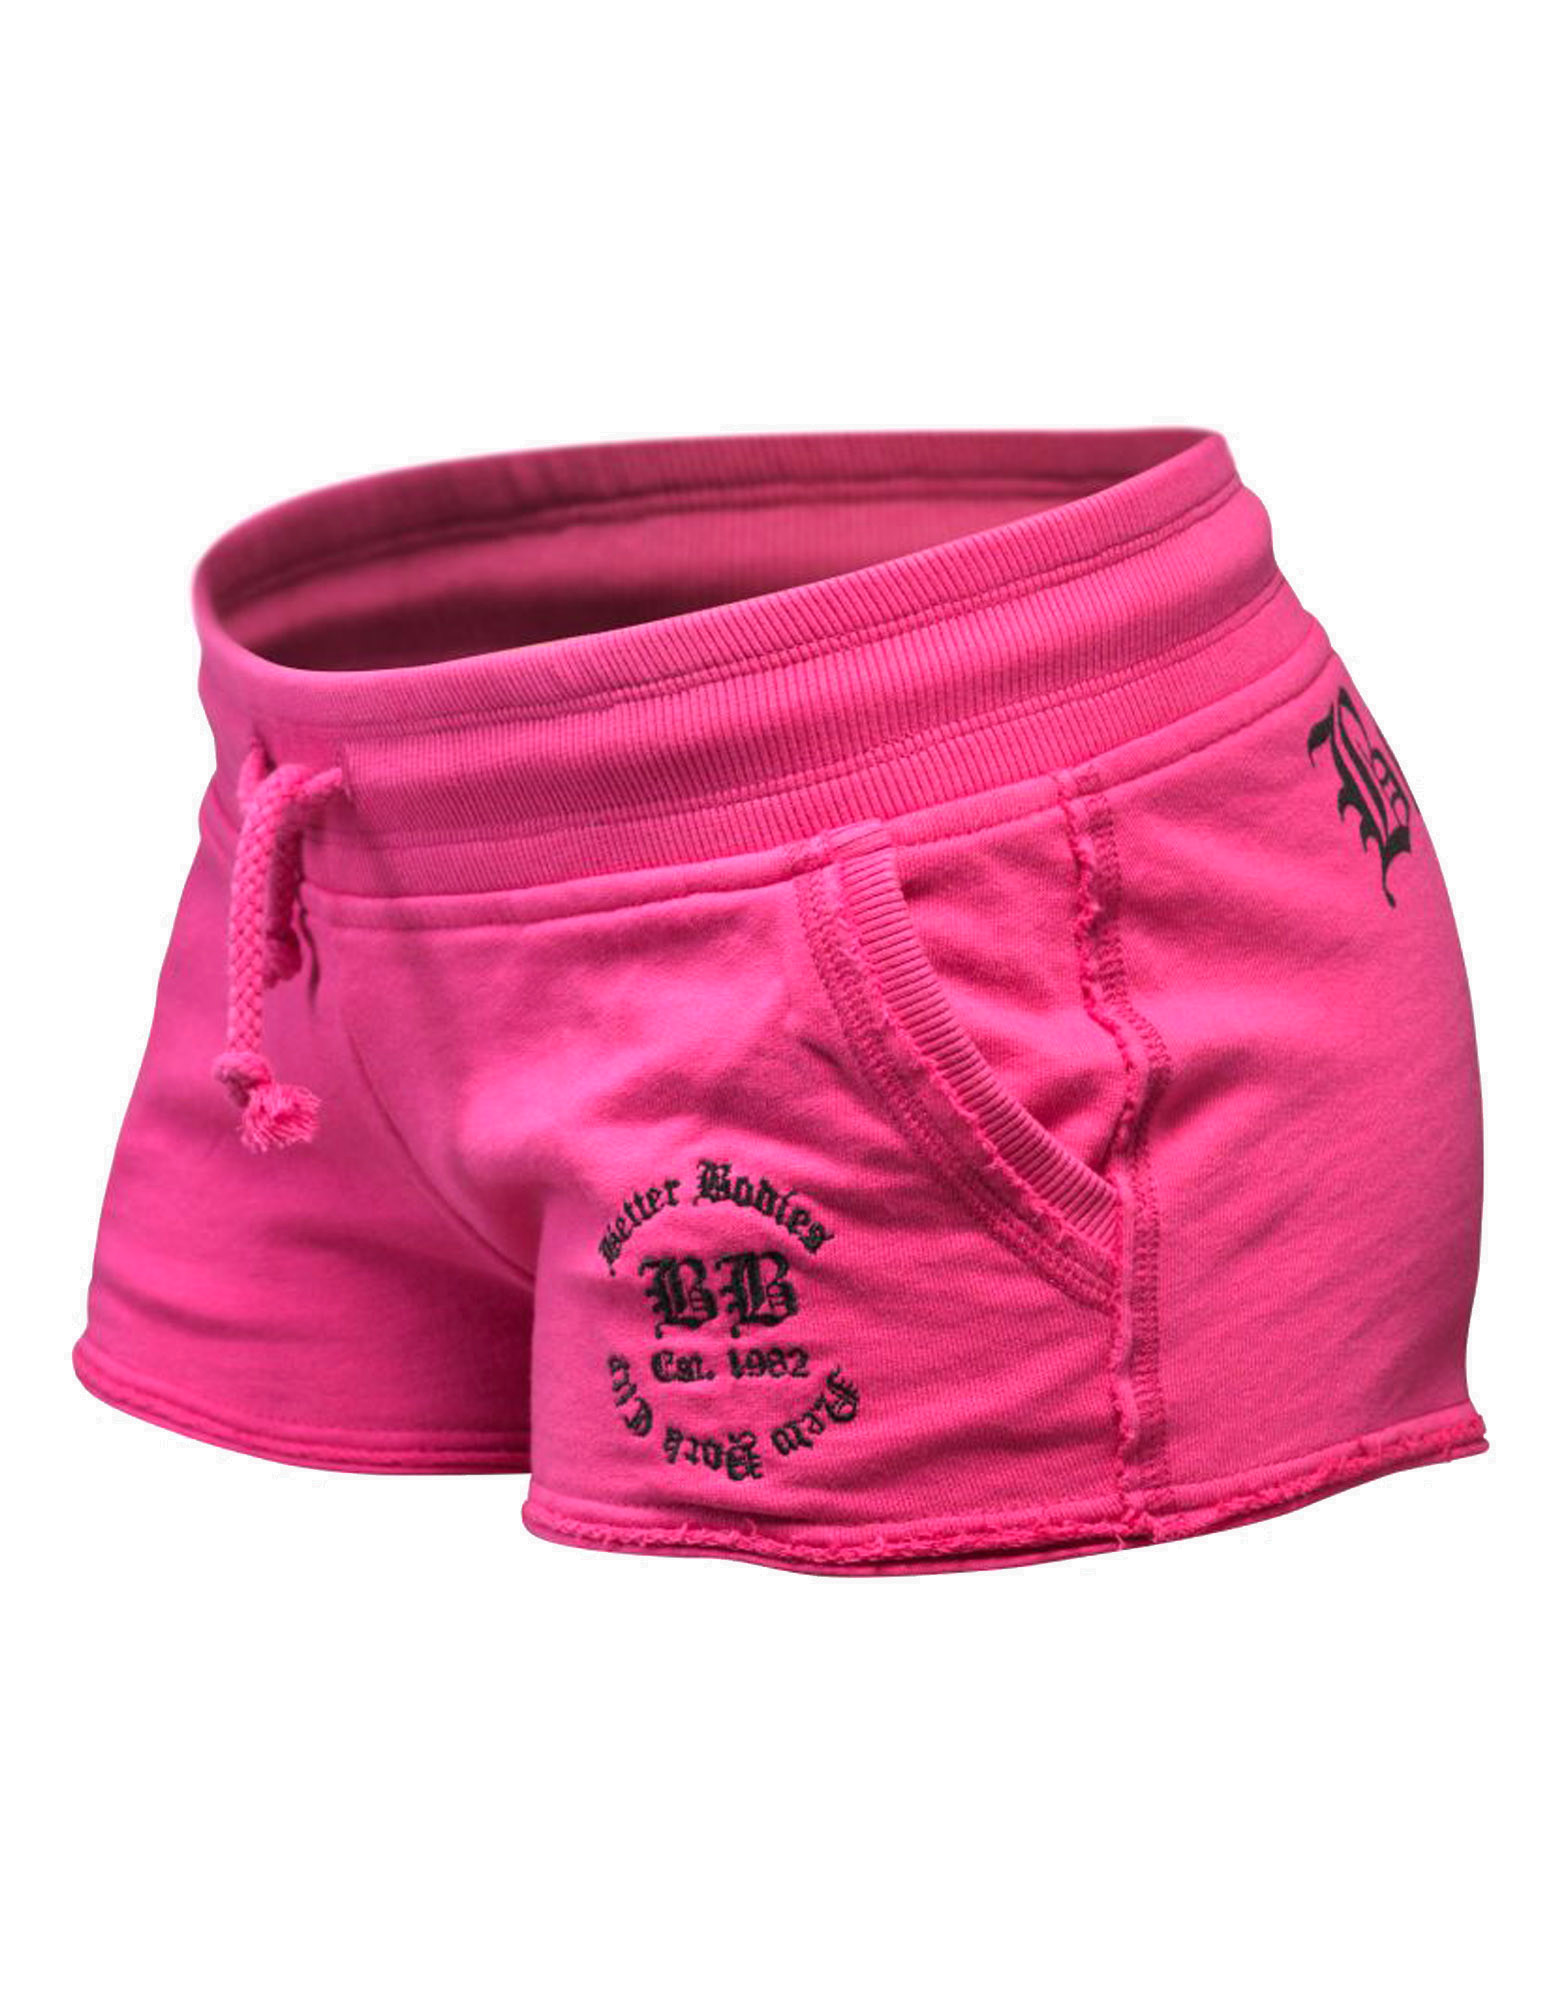 N.Y. Sweatshorts by BETTER BODIES (colour: hot pink)